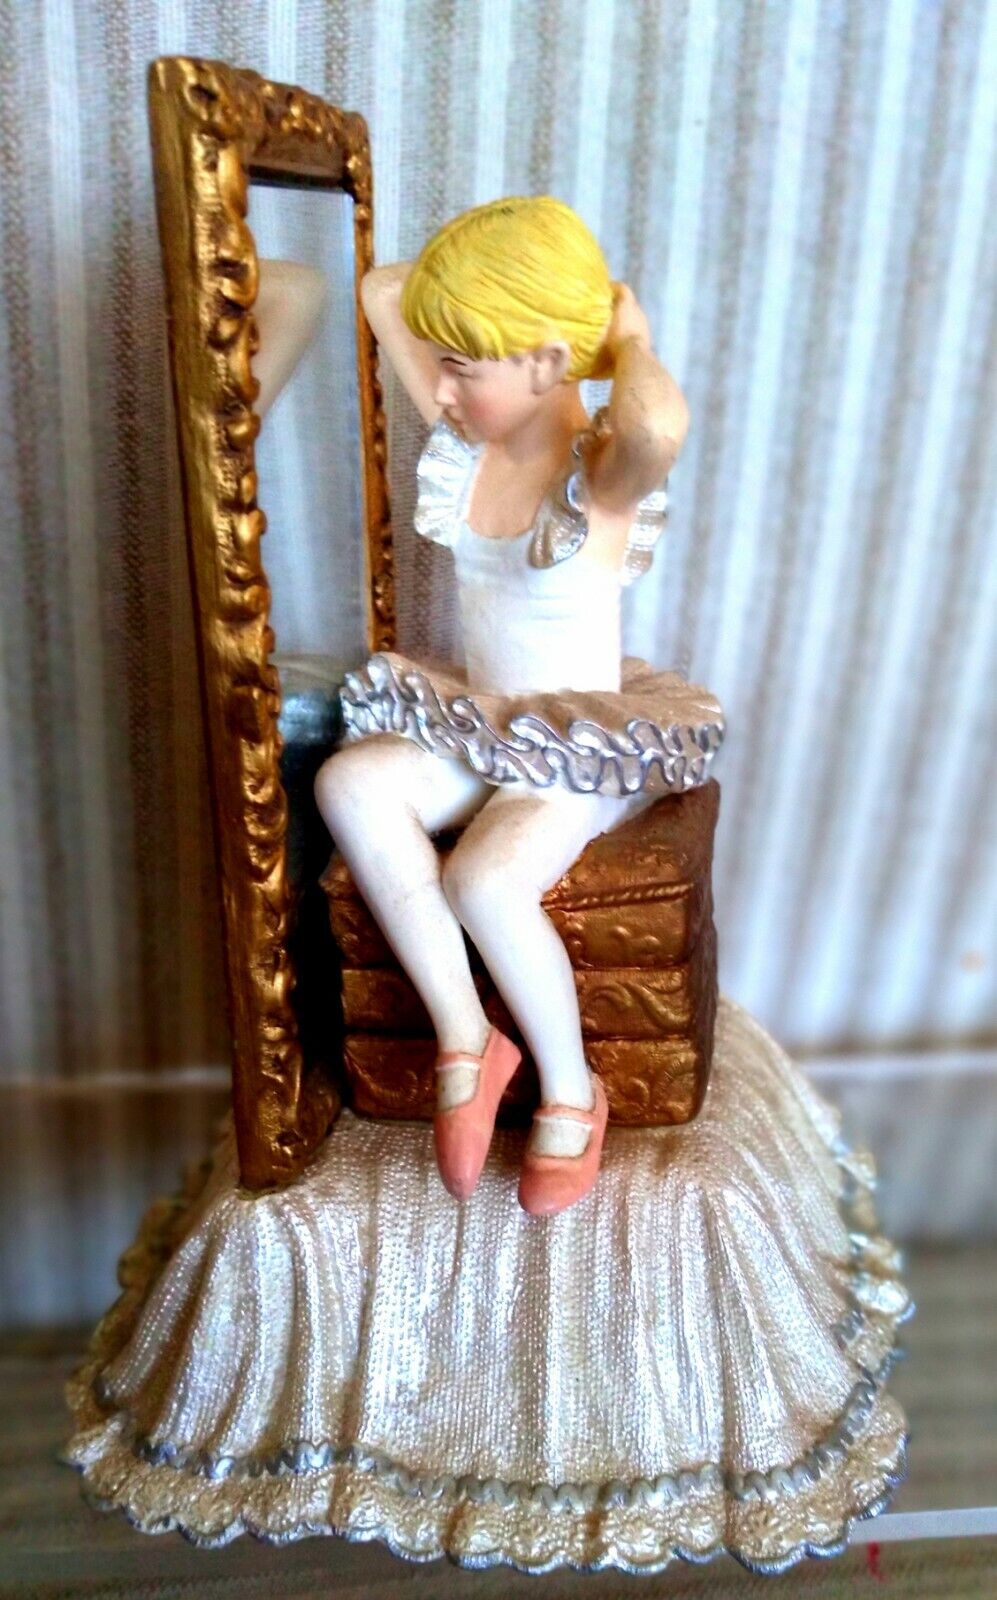 Ballerina Sitting In Front Of Mirror Musical Box The San Francisco Music Box Co.